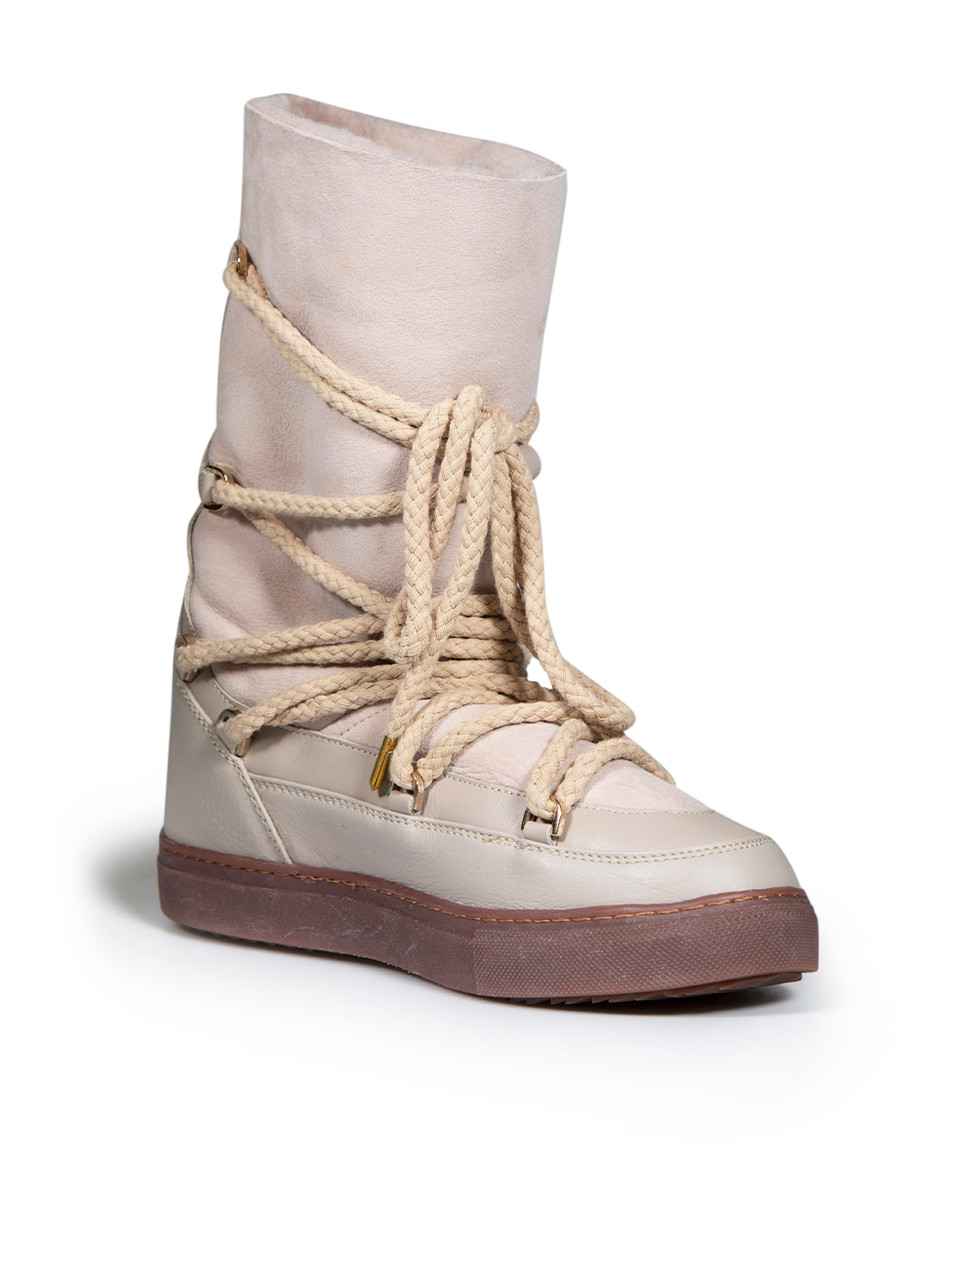 Inuikii Beige Suede Shearling Lined Snow Boots